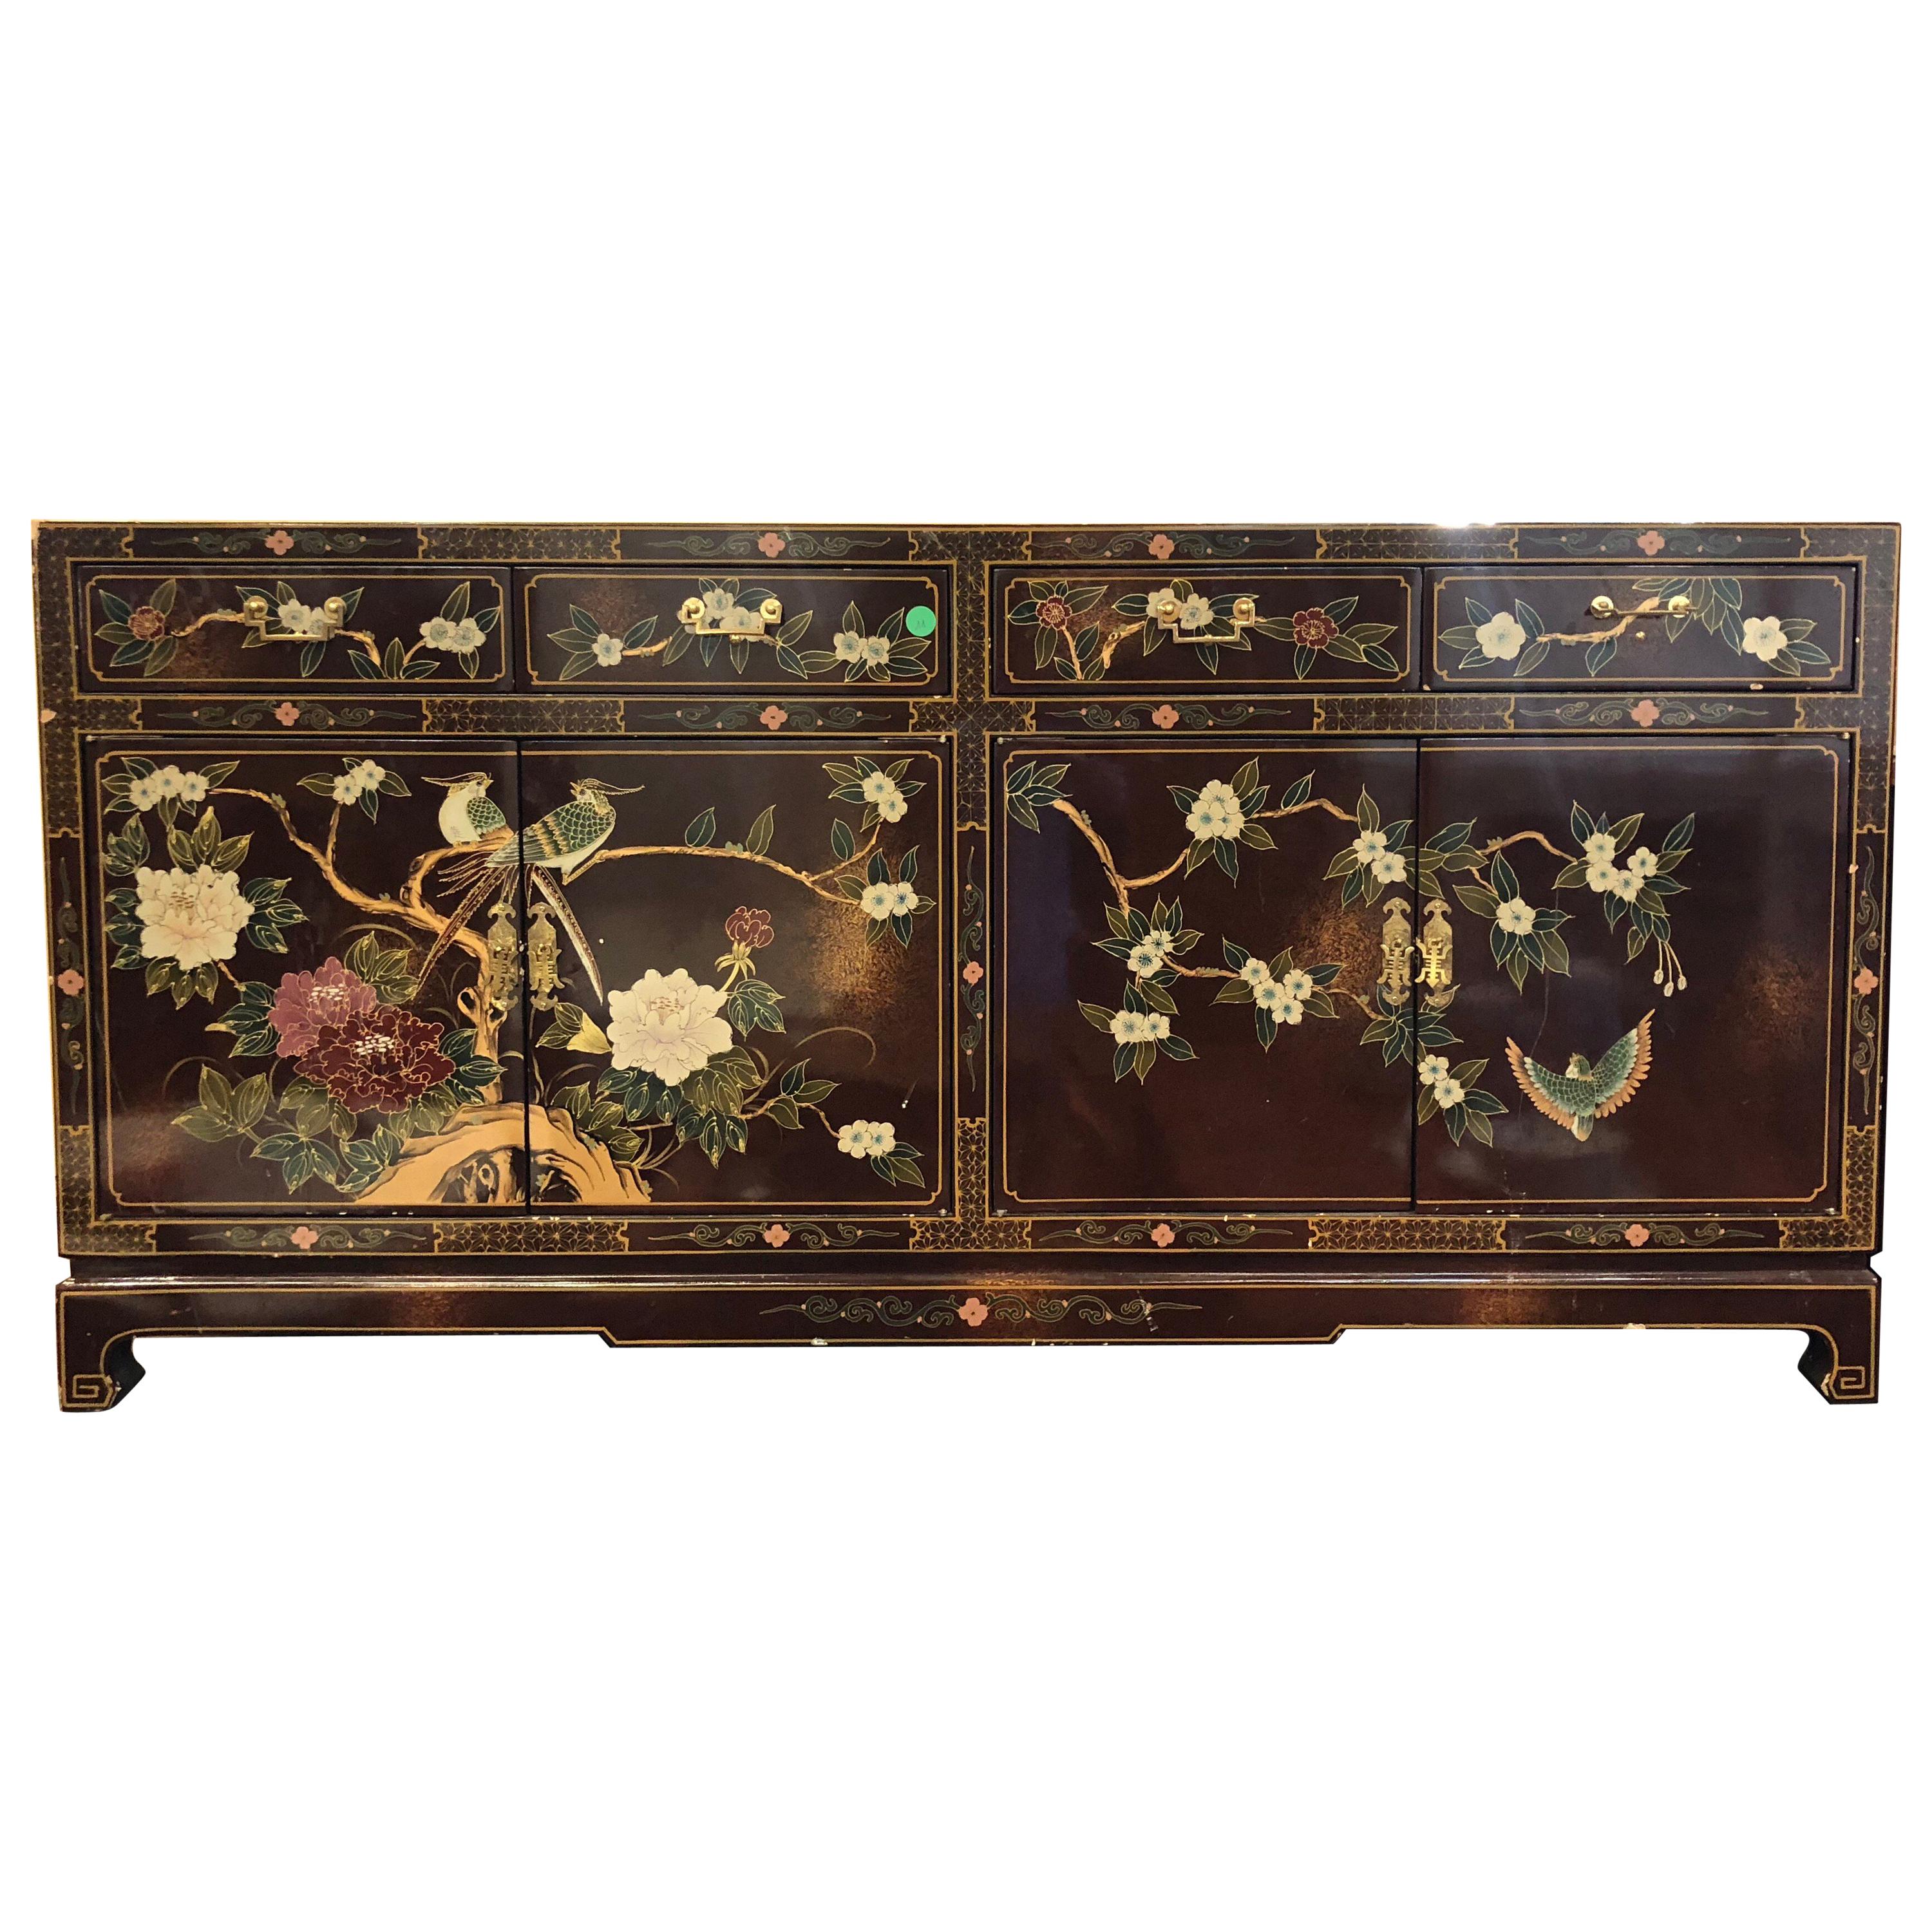 Antique Chinoiserie Style Wooden Buffet or Cabinet Hand-Painted Scenes